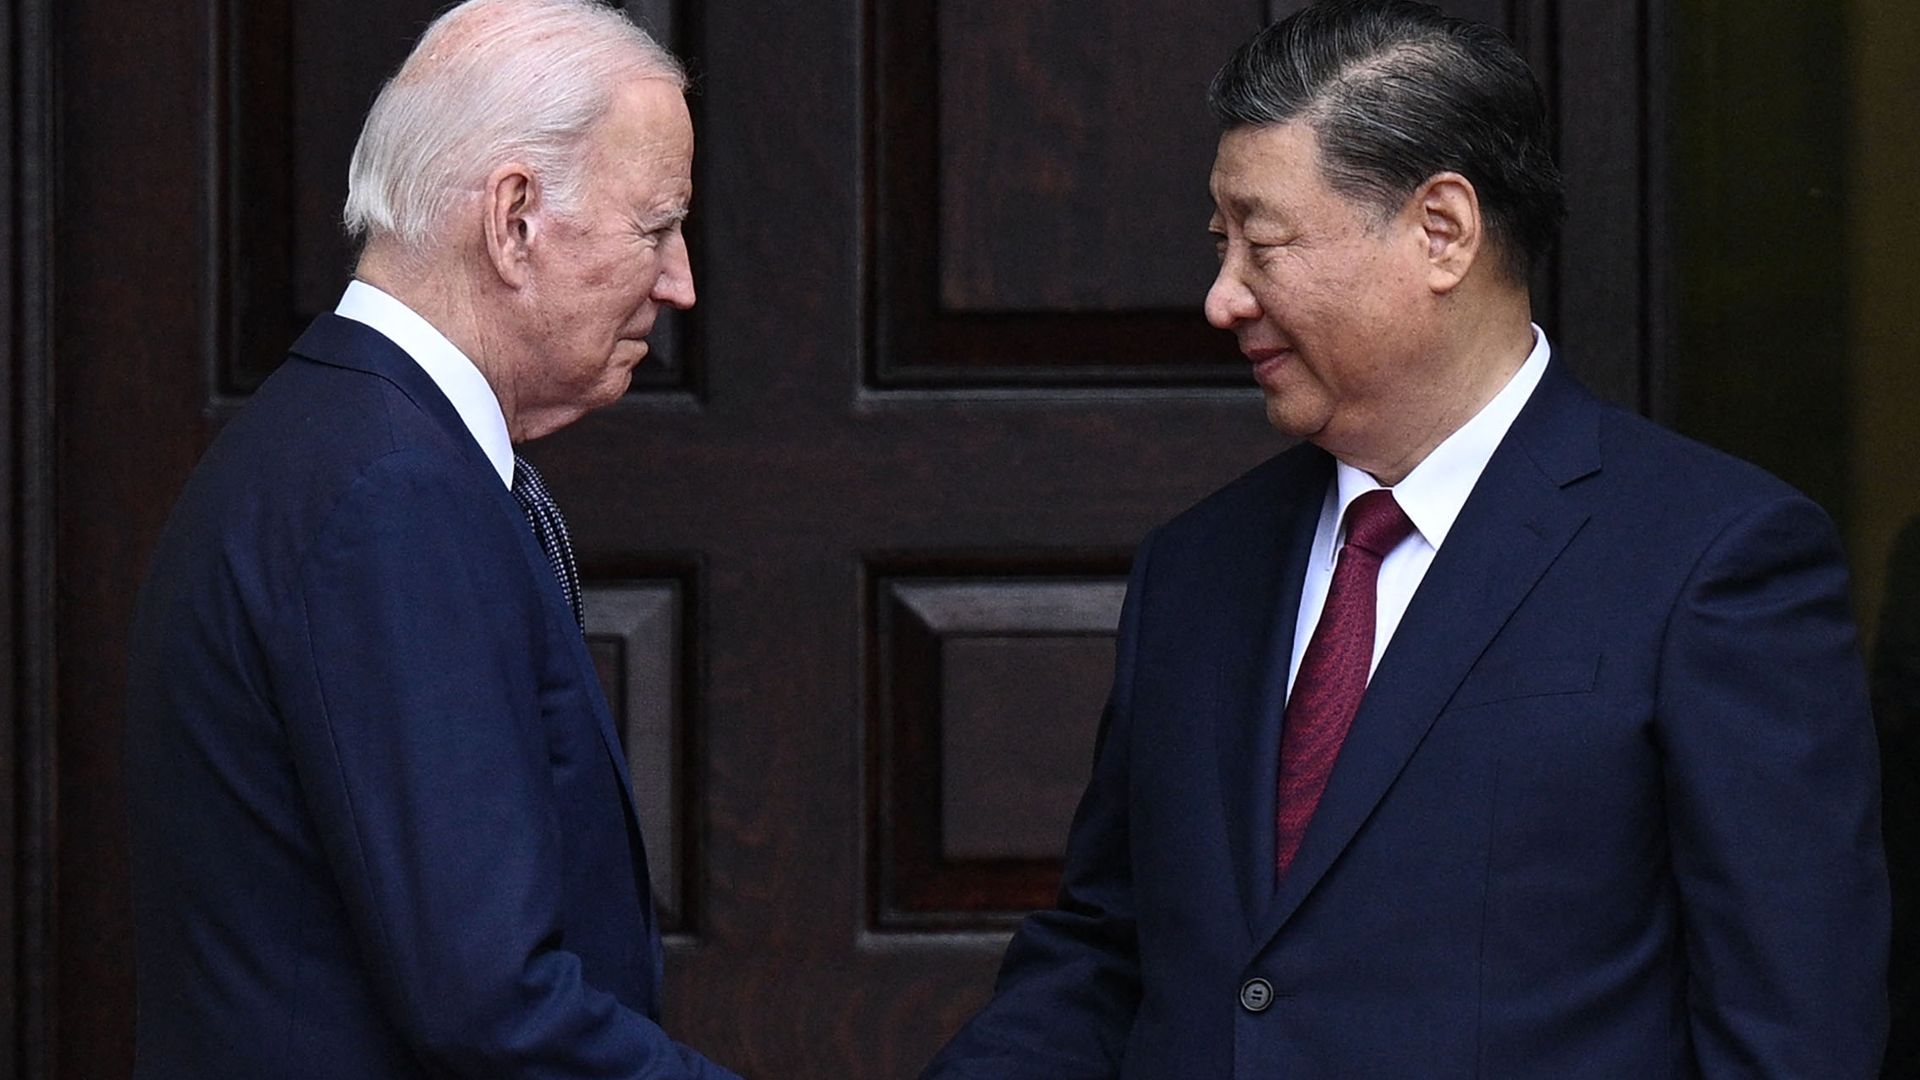 Chinese writers made key observations in their coverage of Joe Biden's and Xi Jinping's meeting in San Francisco.